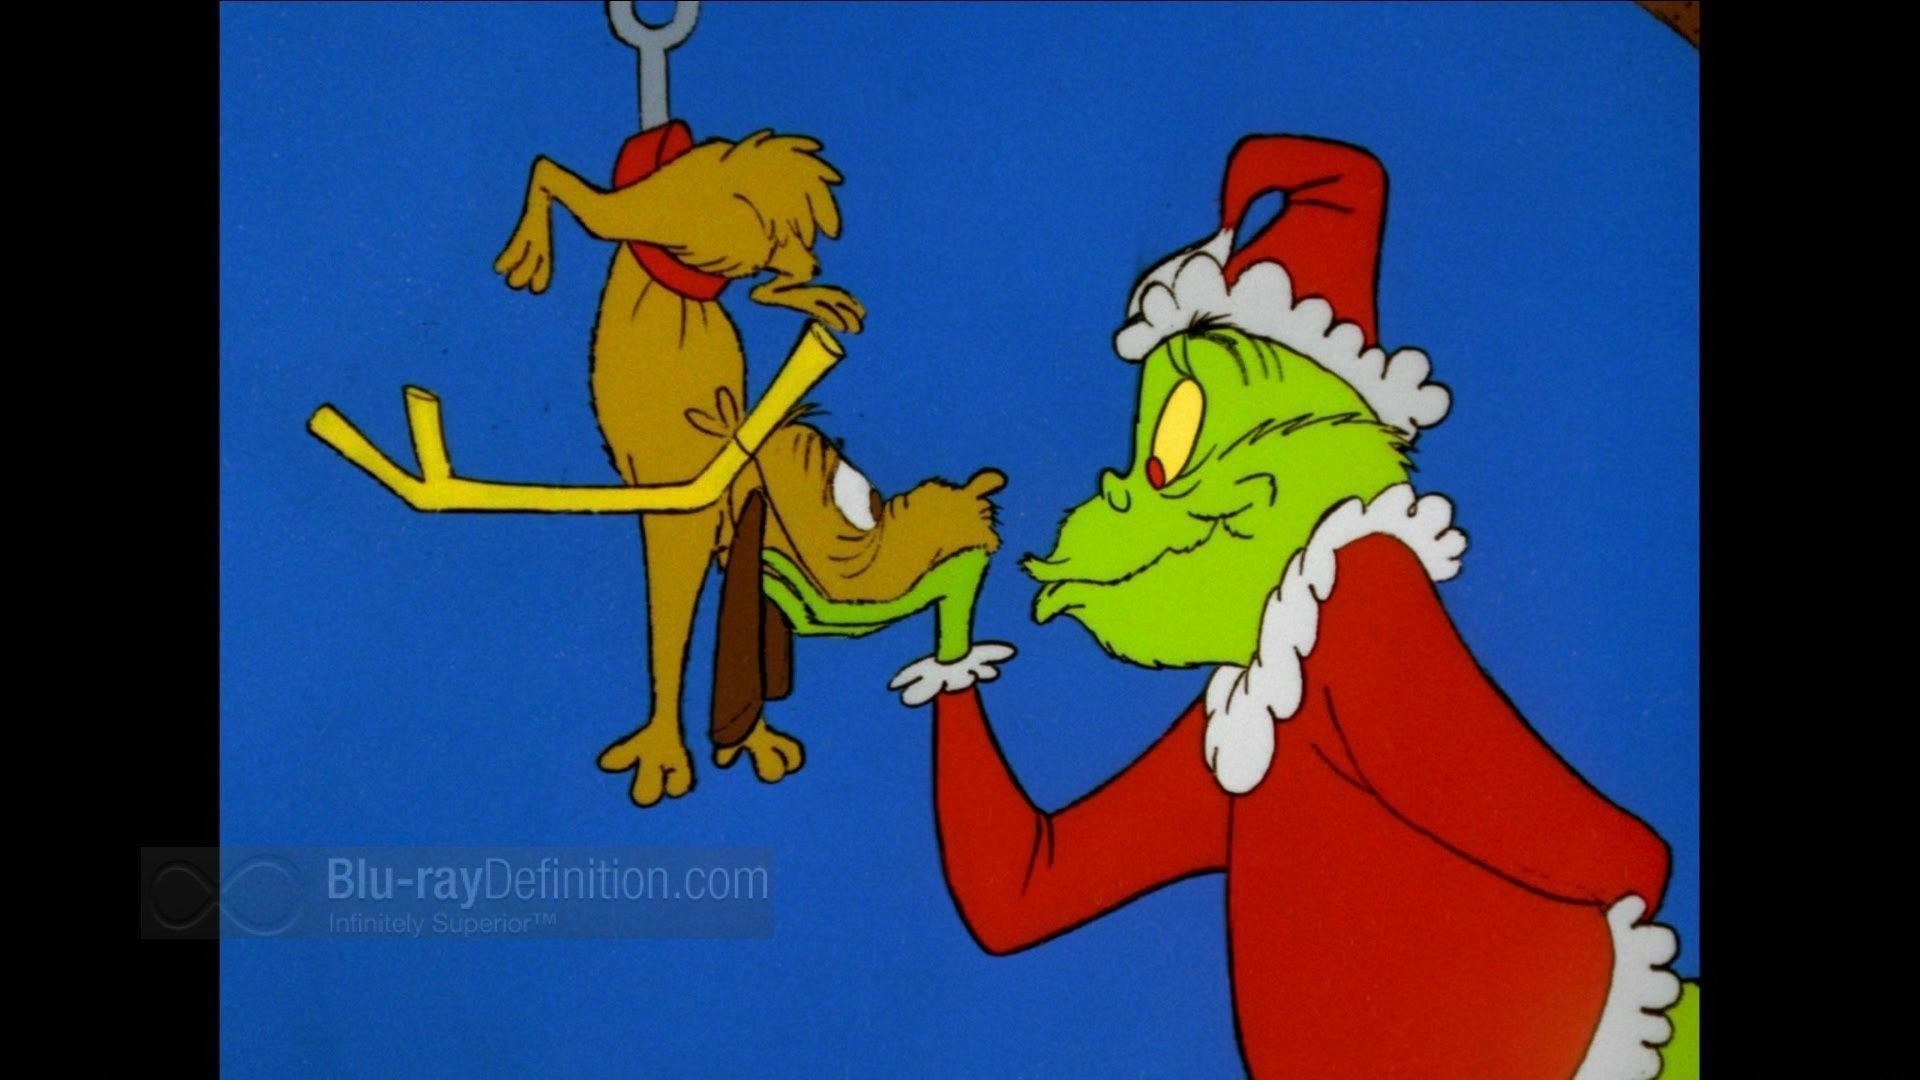 1920x1080 The Grinch wallpaper